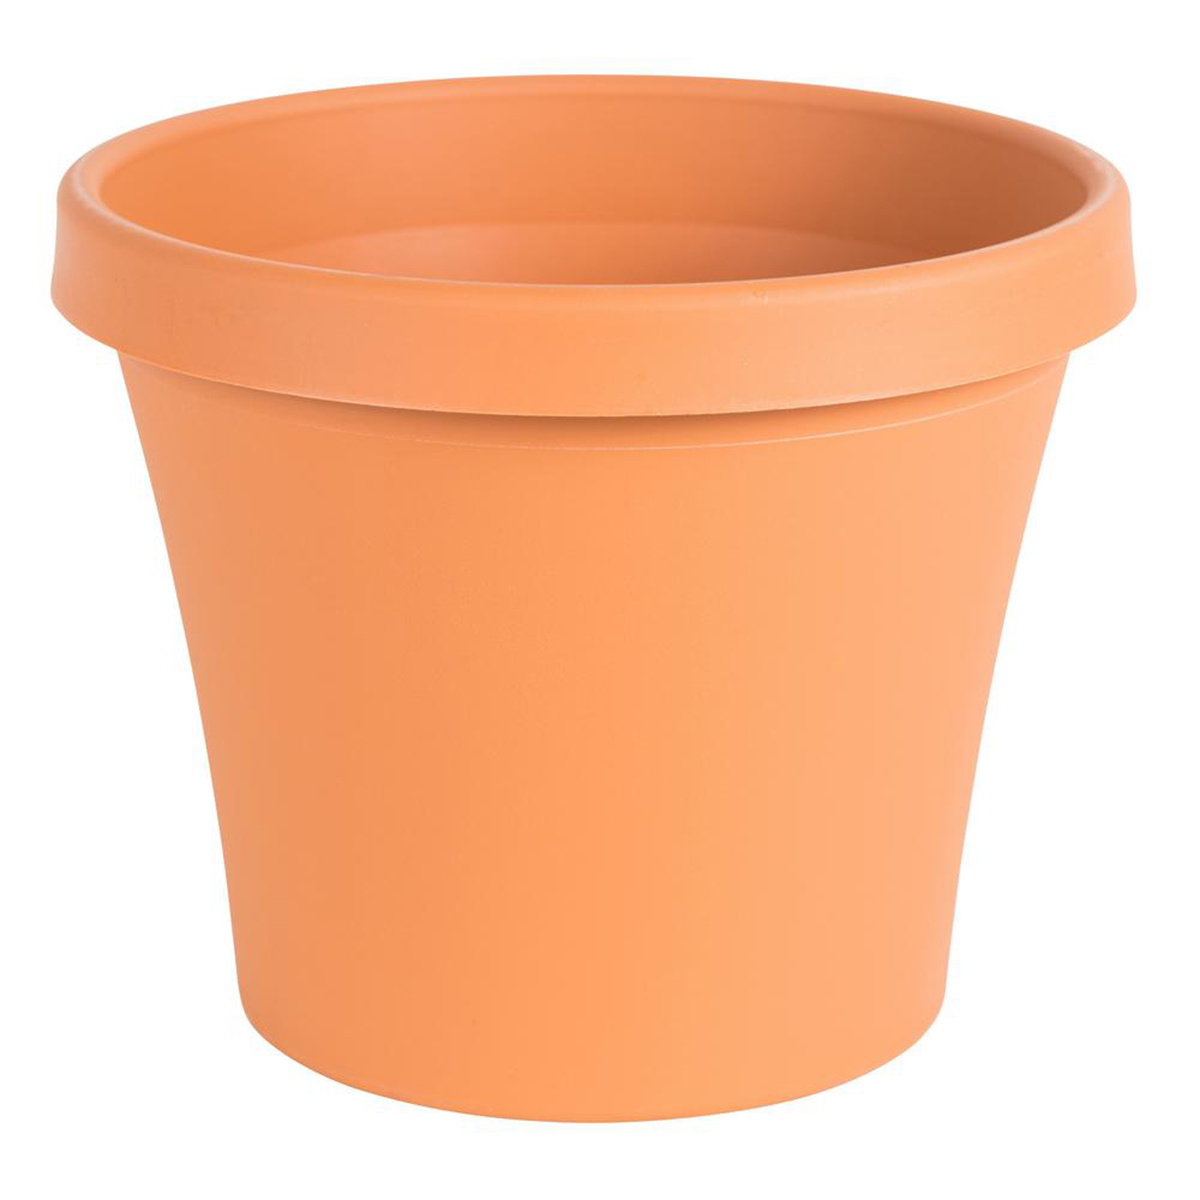 Terrapot Plastic Planter with Drainage and Tray in 24 inch Diameter